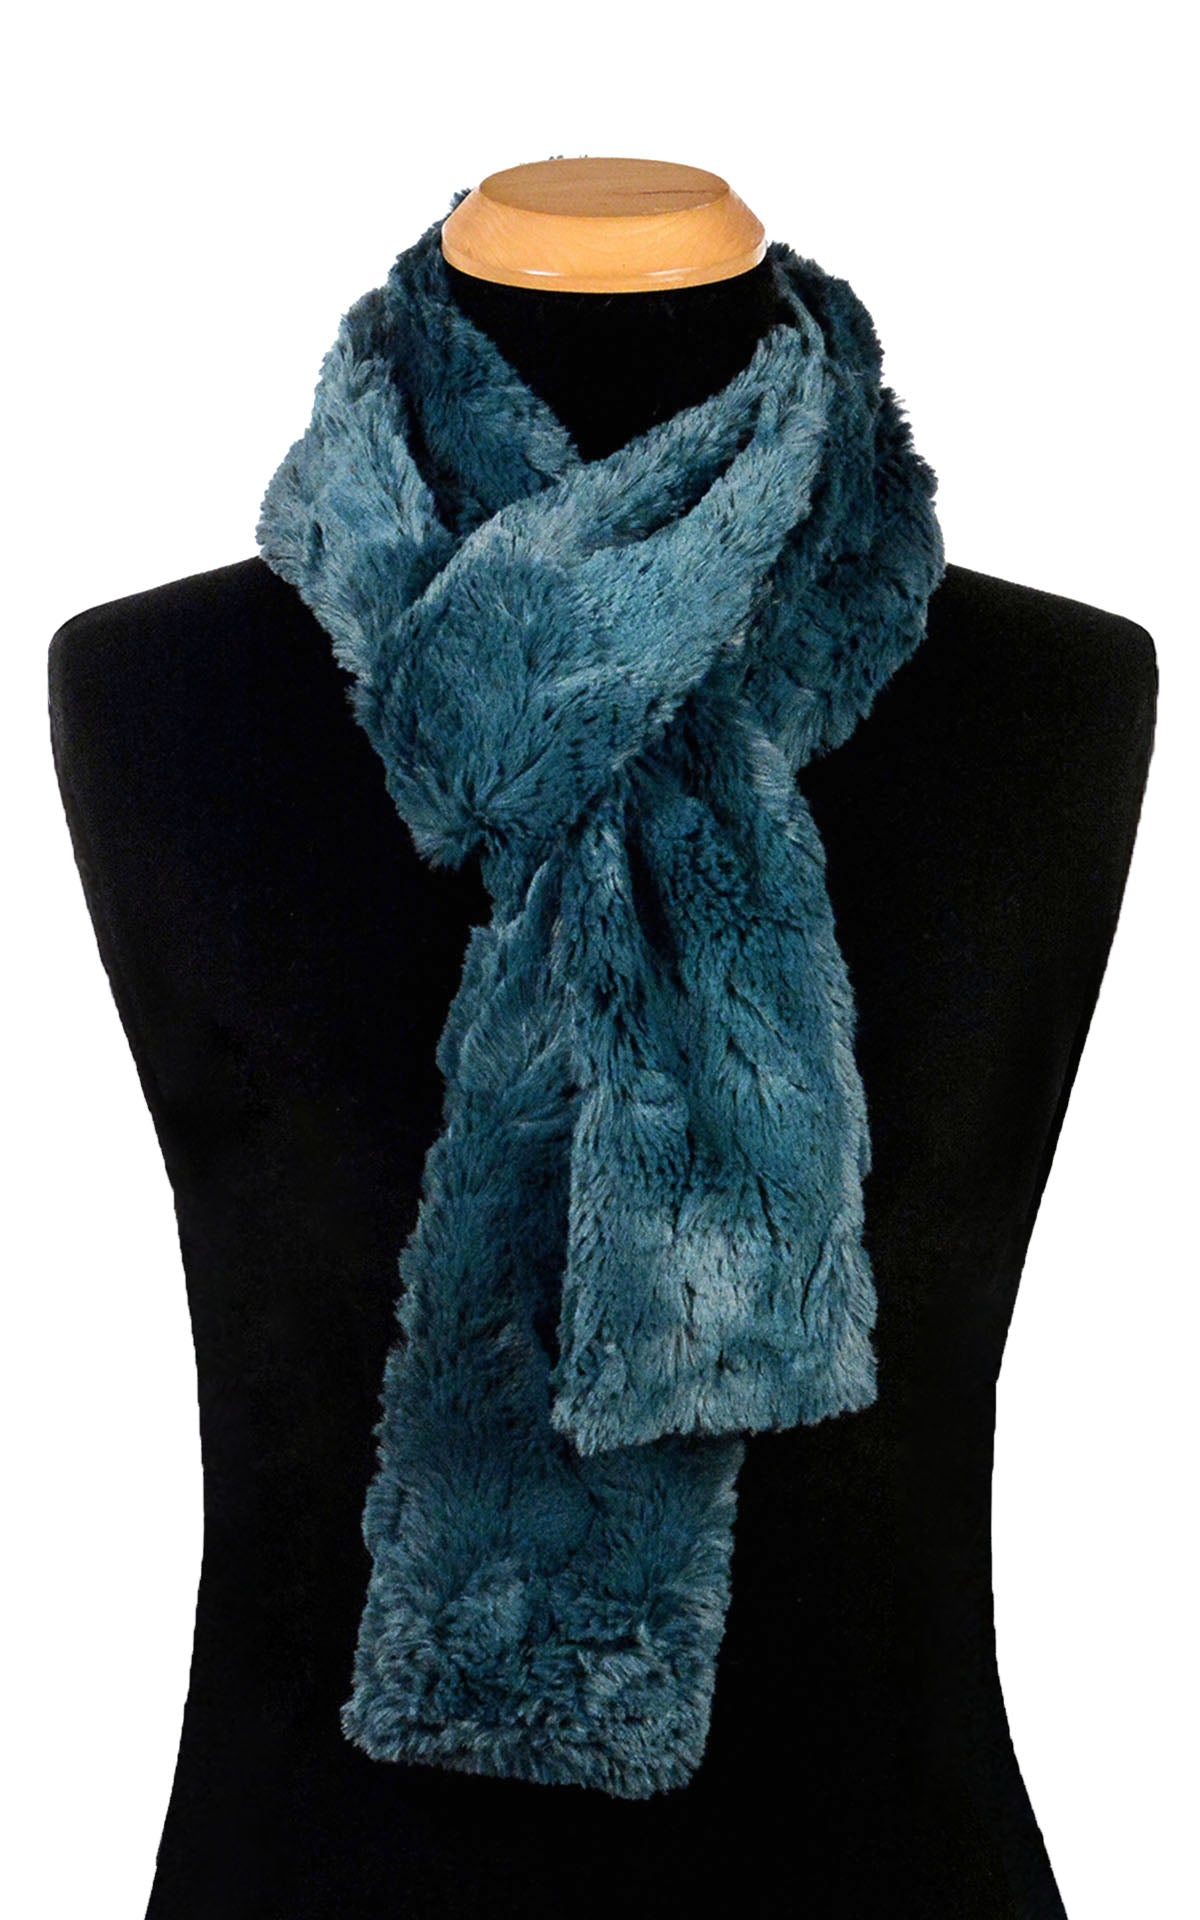 Men’s Product shot on mannequin of Classic Scarf | Peacock Pond blue/teal Faux Fur | Handmade by Pandemonium Millinery Seattle, WA USA